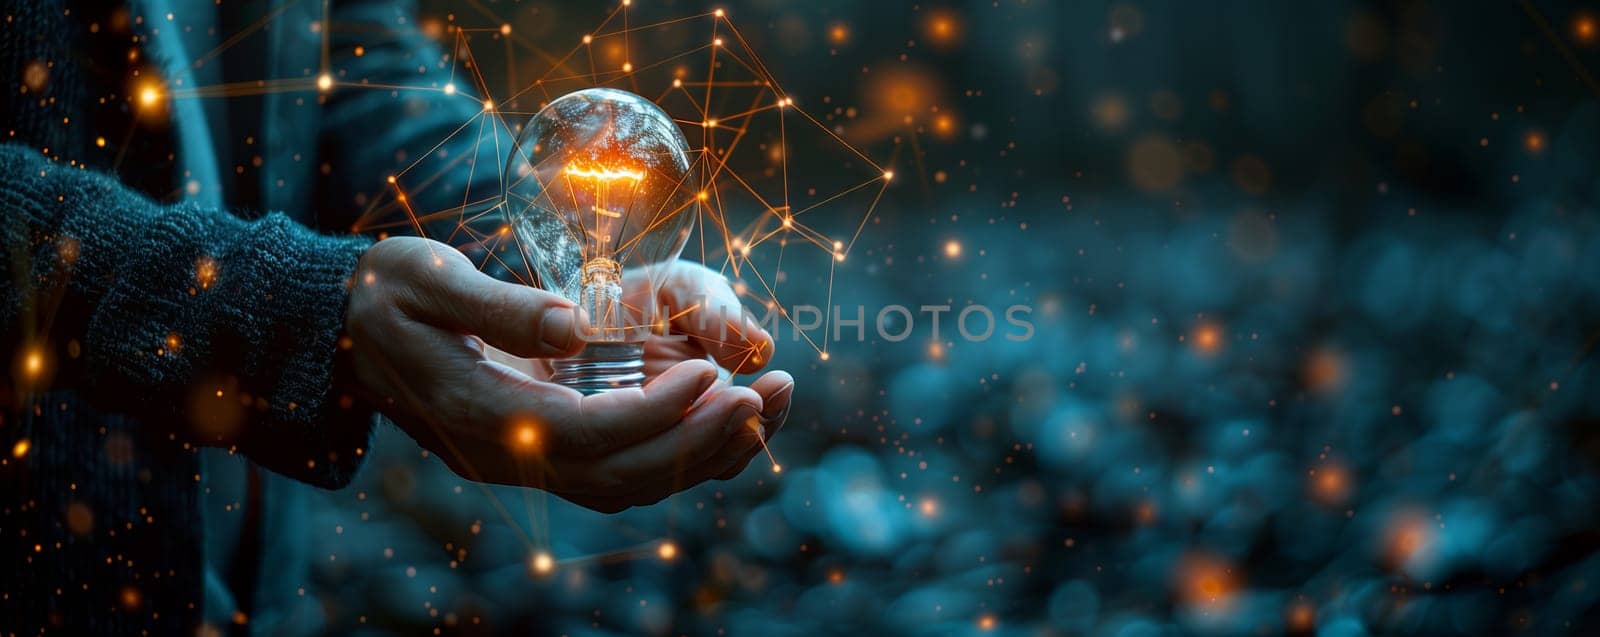 In an underwater event, a person holds an electric blue light bulb surrounded by grass. The scene resembles an astronomical object, creating a fun and mesmerizing animation through the glass